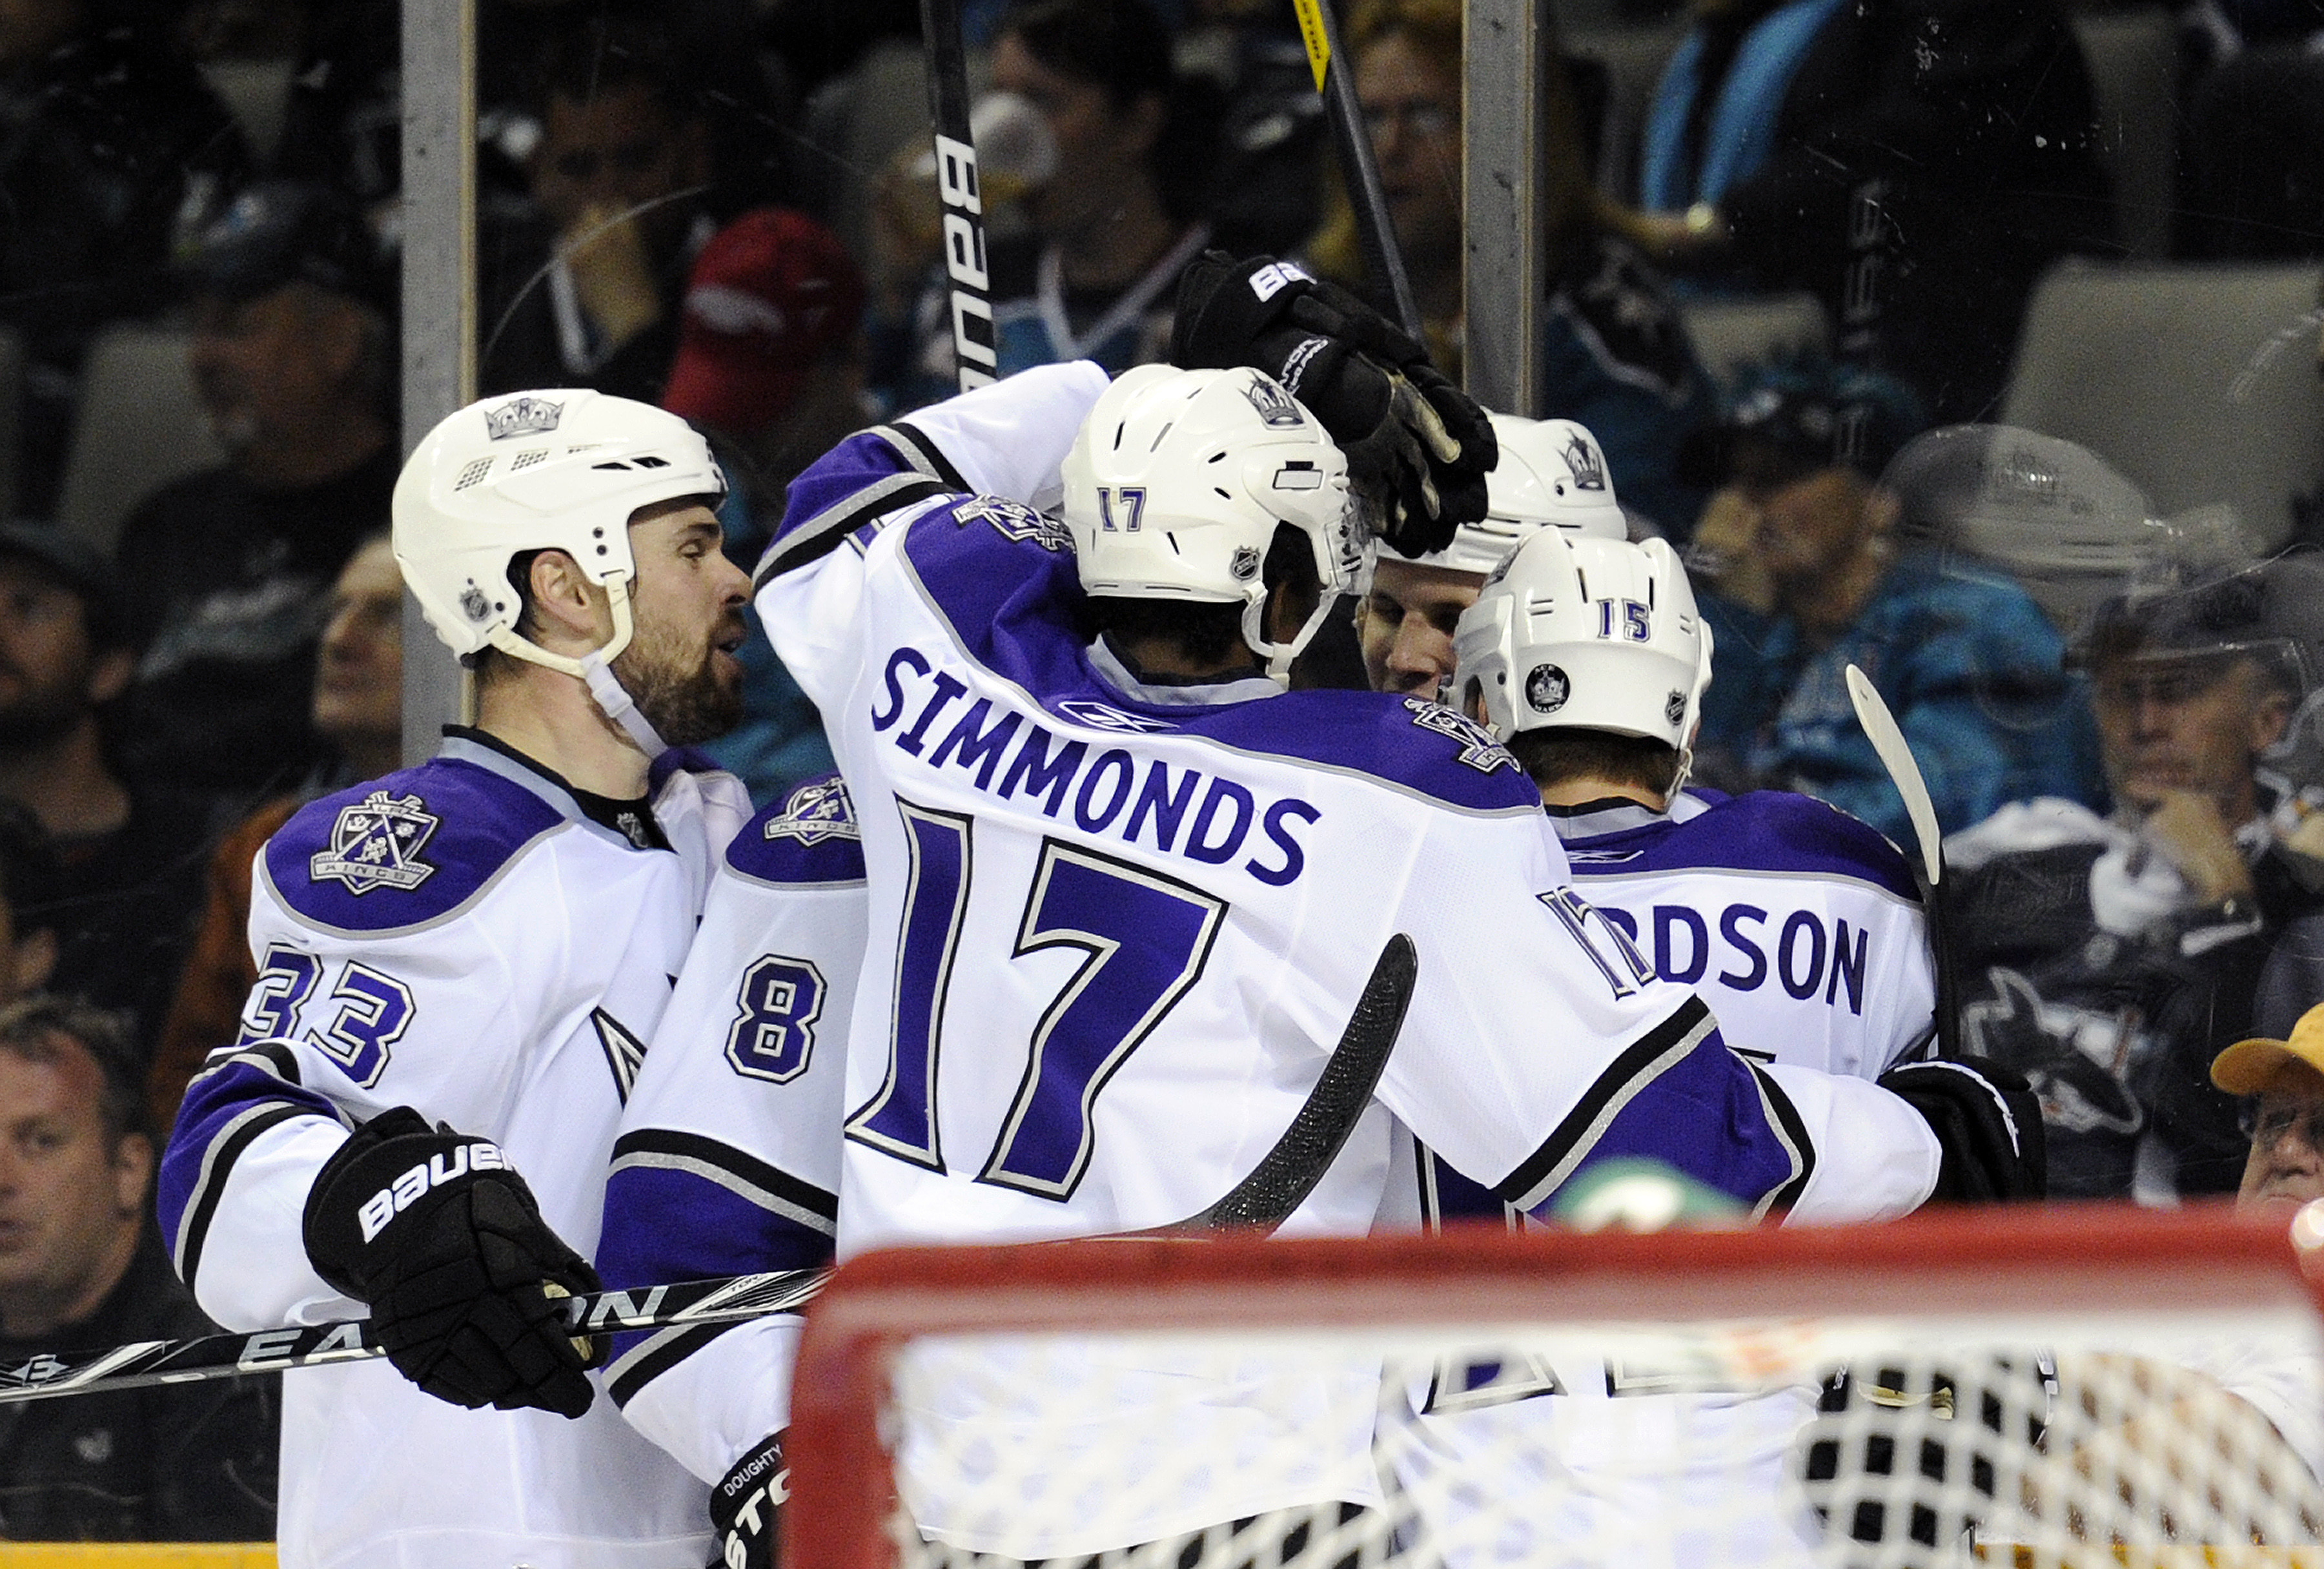 SAN JOSE, CA - APRIL 16: Kyle Clifford #13 of the Los Angeles Kings scores a goal and celebrates with teammates, Willie Mitchell #33, Wayne Simmonds #17, Drew Doughty #8 and Brad Richardson #15 during a game against the San Jose Sharks in Game Two of the